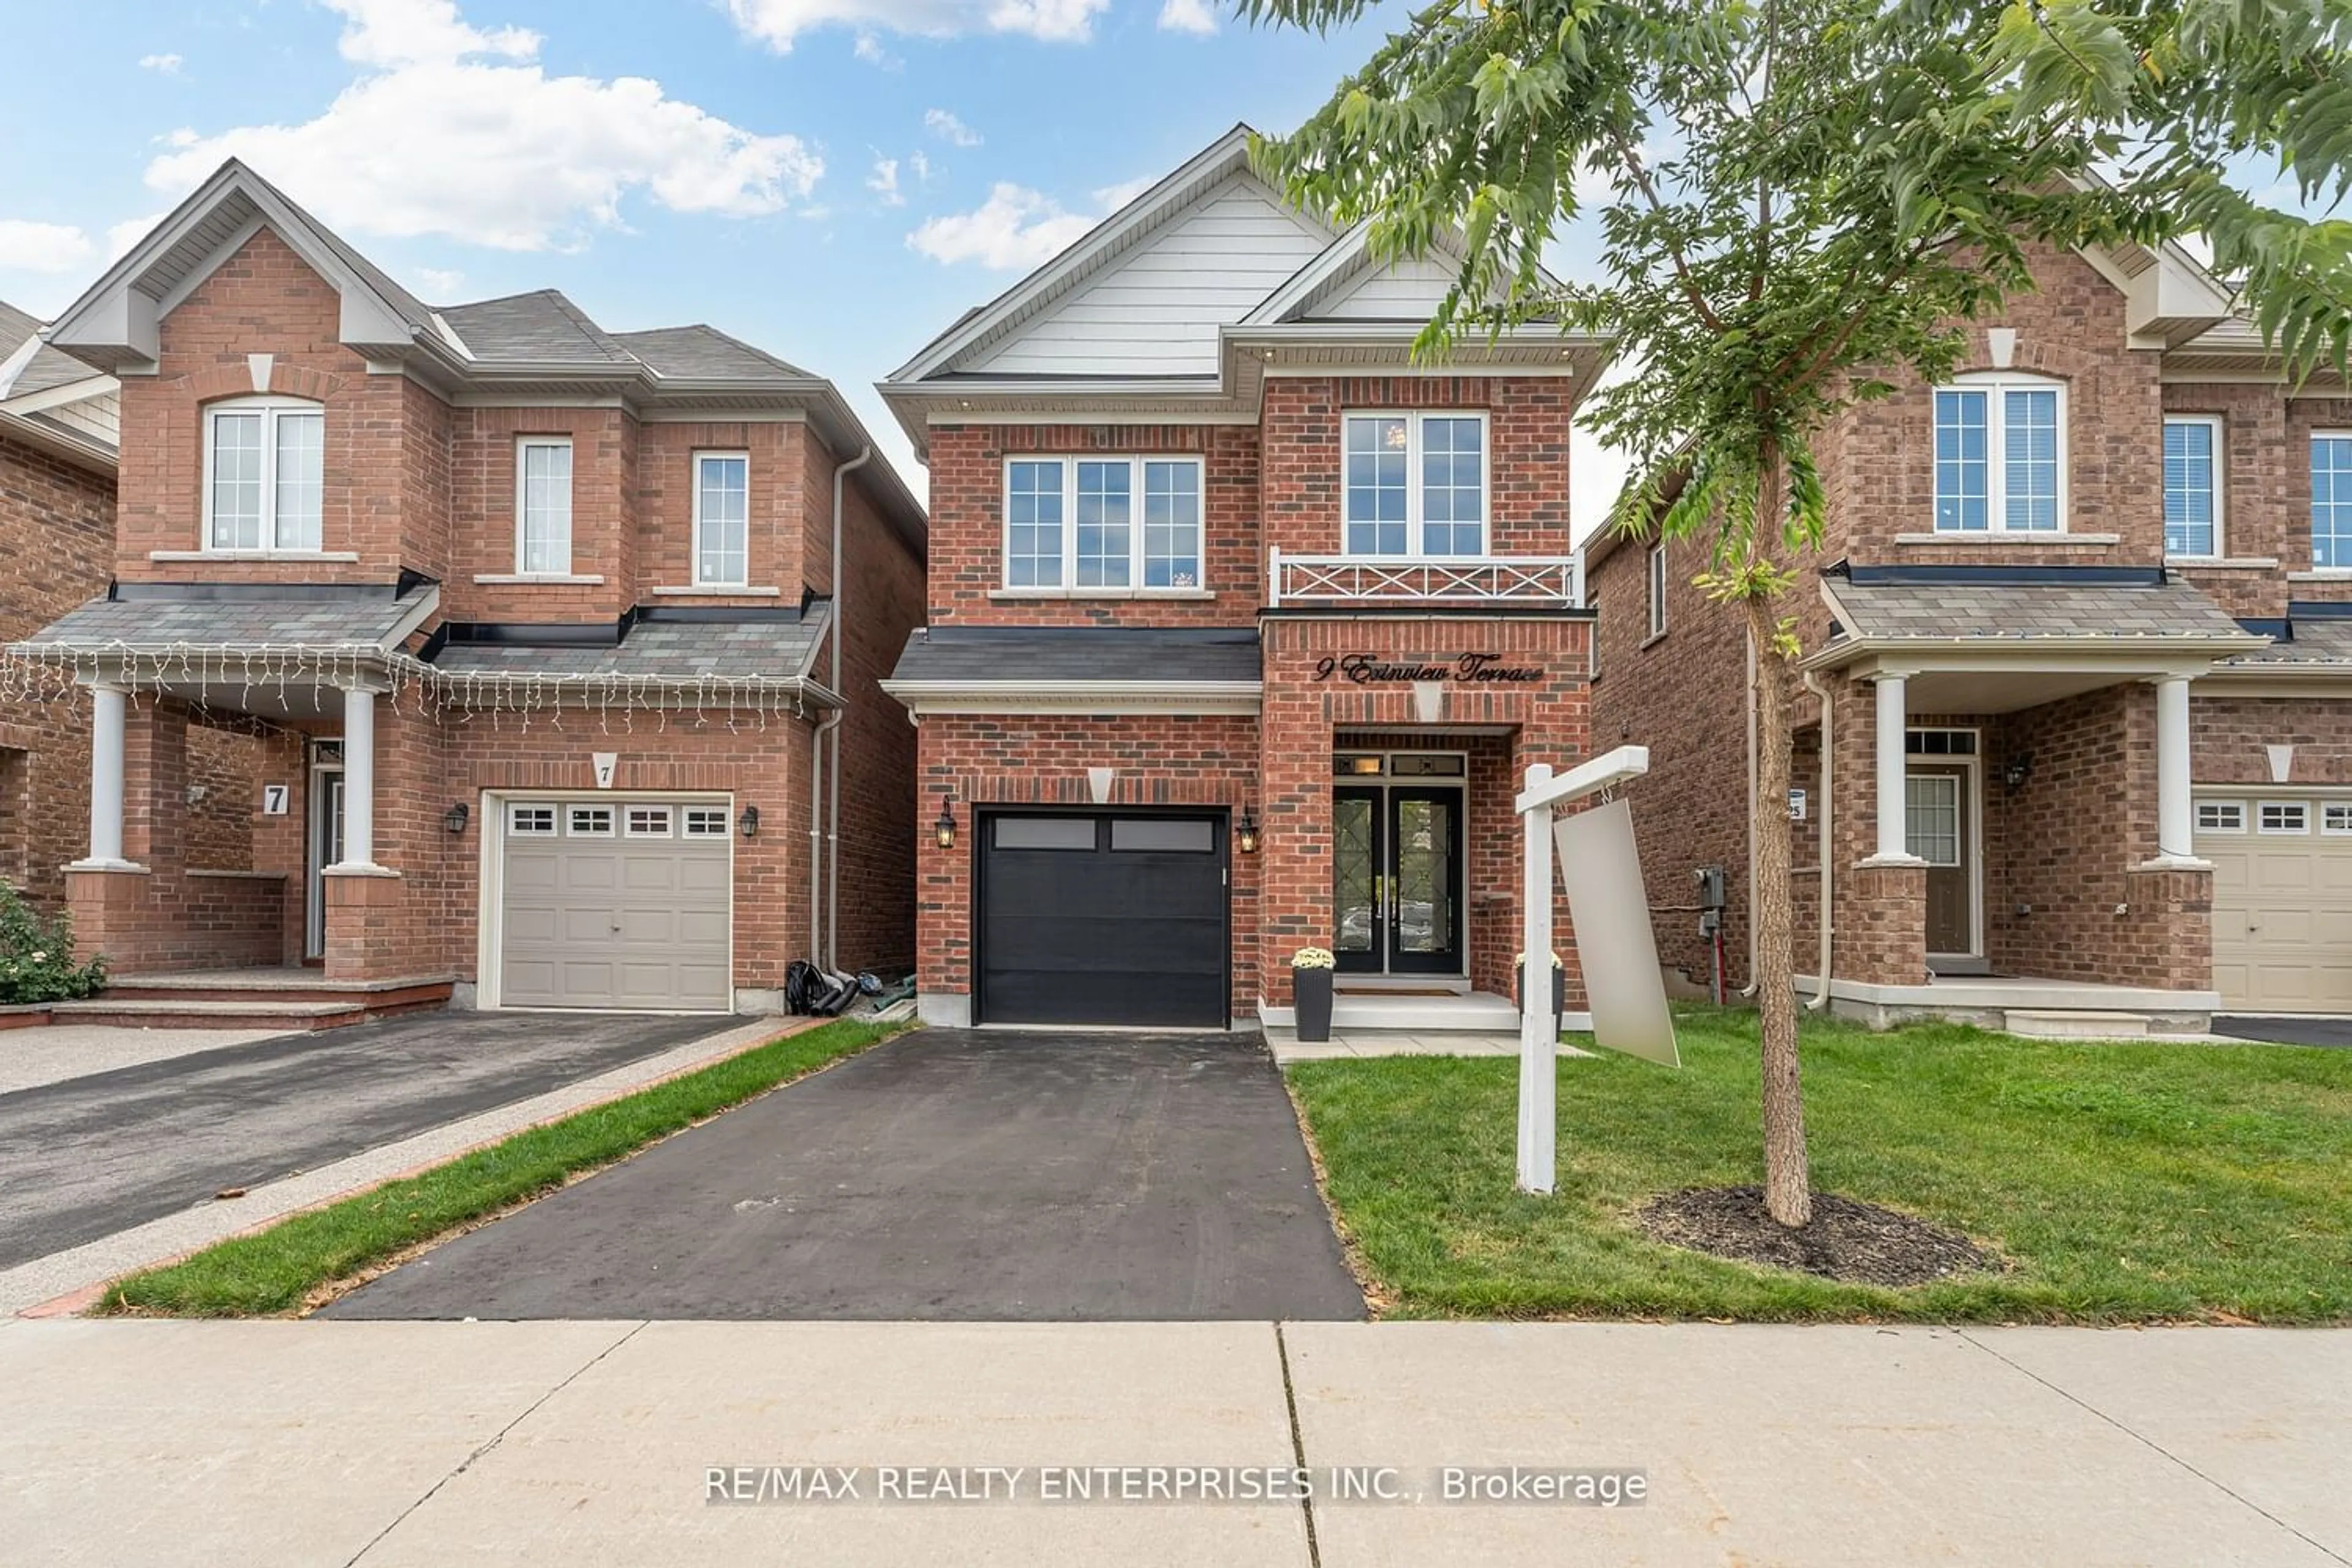 Home with brick exterior material for 9 Erinview Terr, Toronto Ontario M9C 0C3